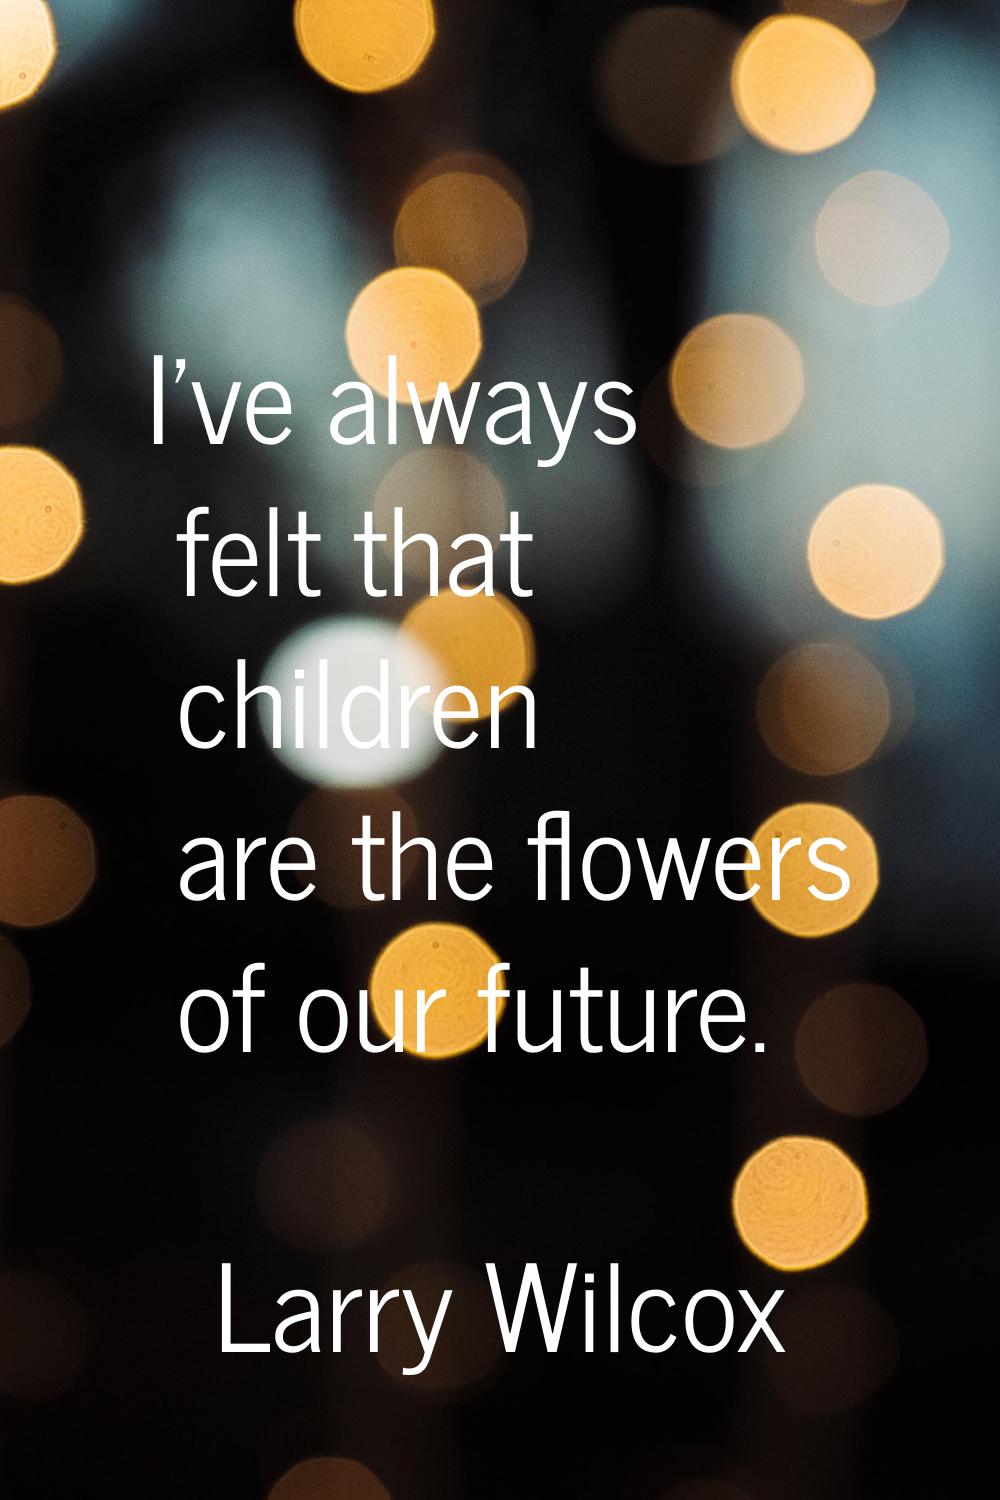 I've always felt that children are the flowers of our future.